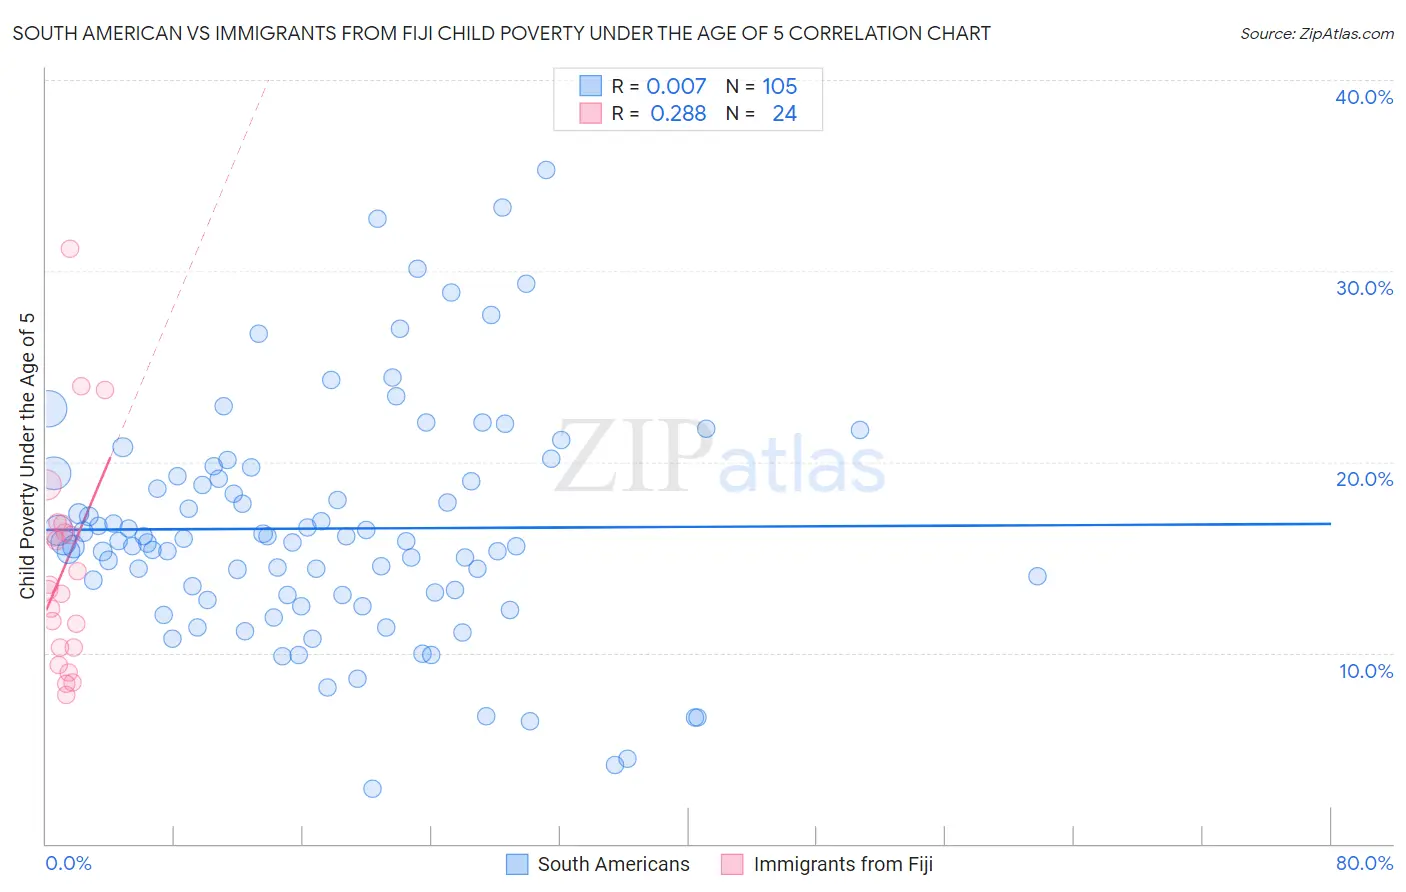 South American vs Immigrants from Fiji Child Poverty Under the Age of 5